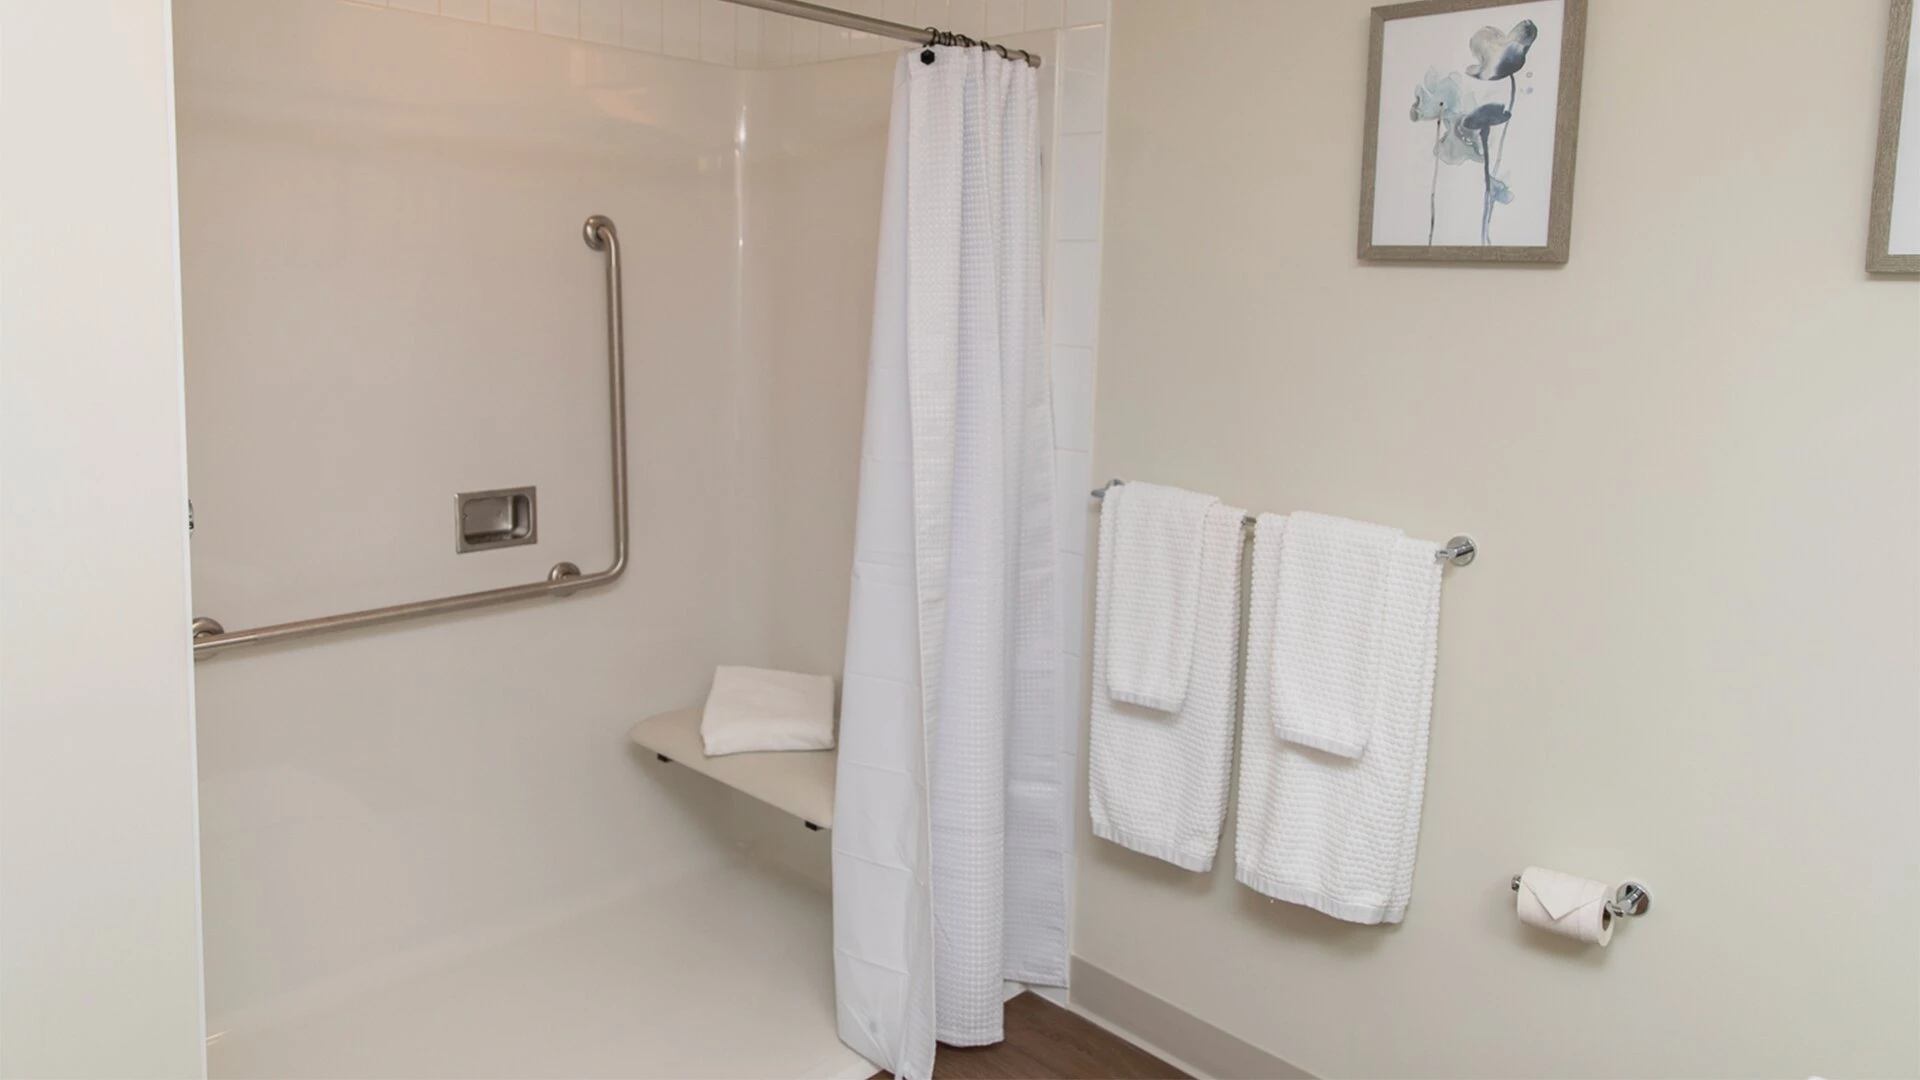 A walk-in shower in a Wisteria Place senior apartment